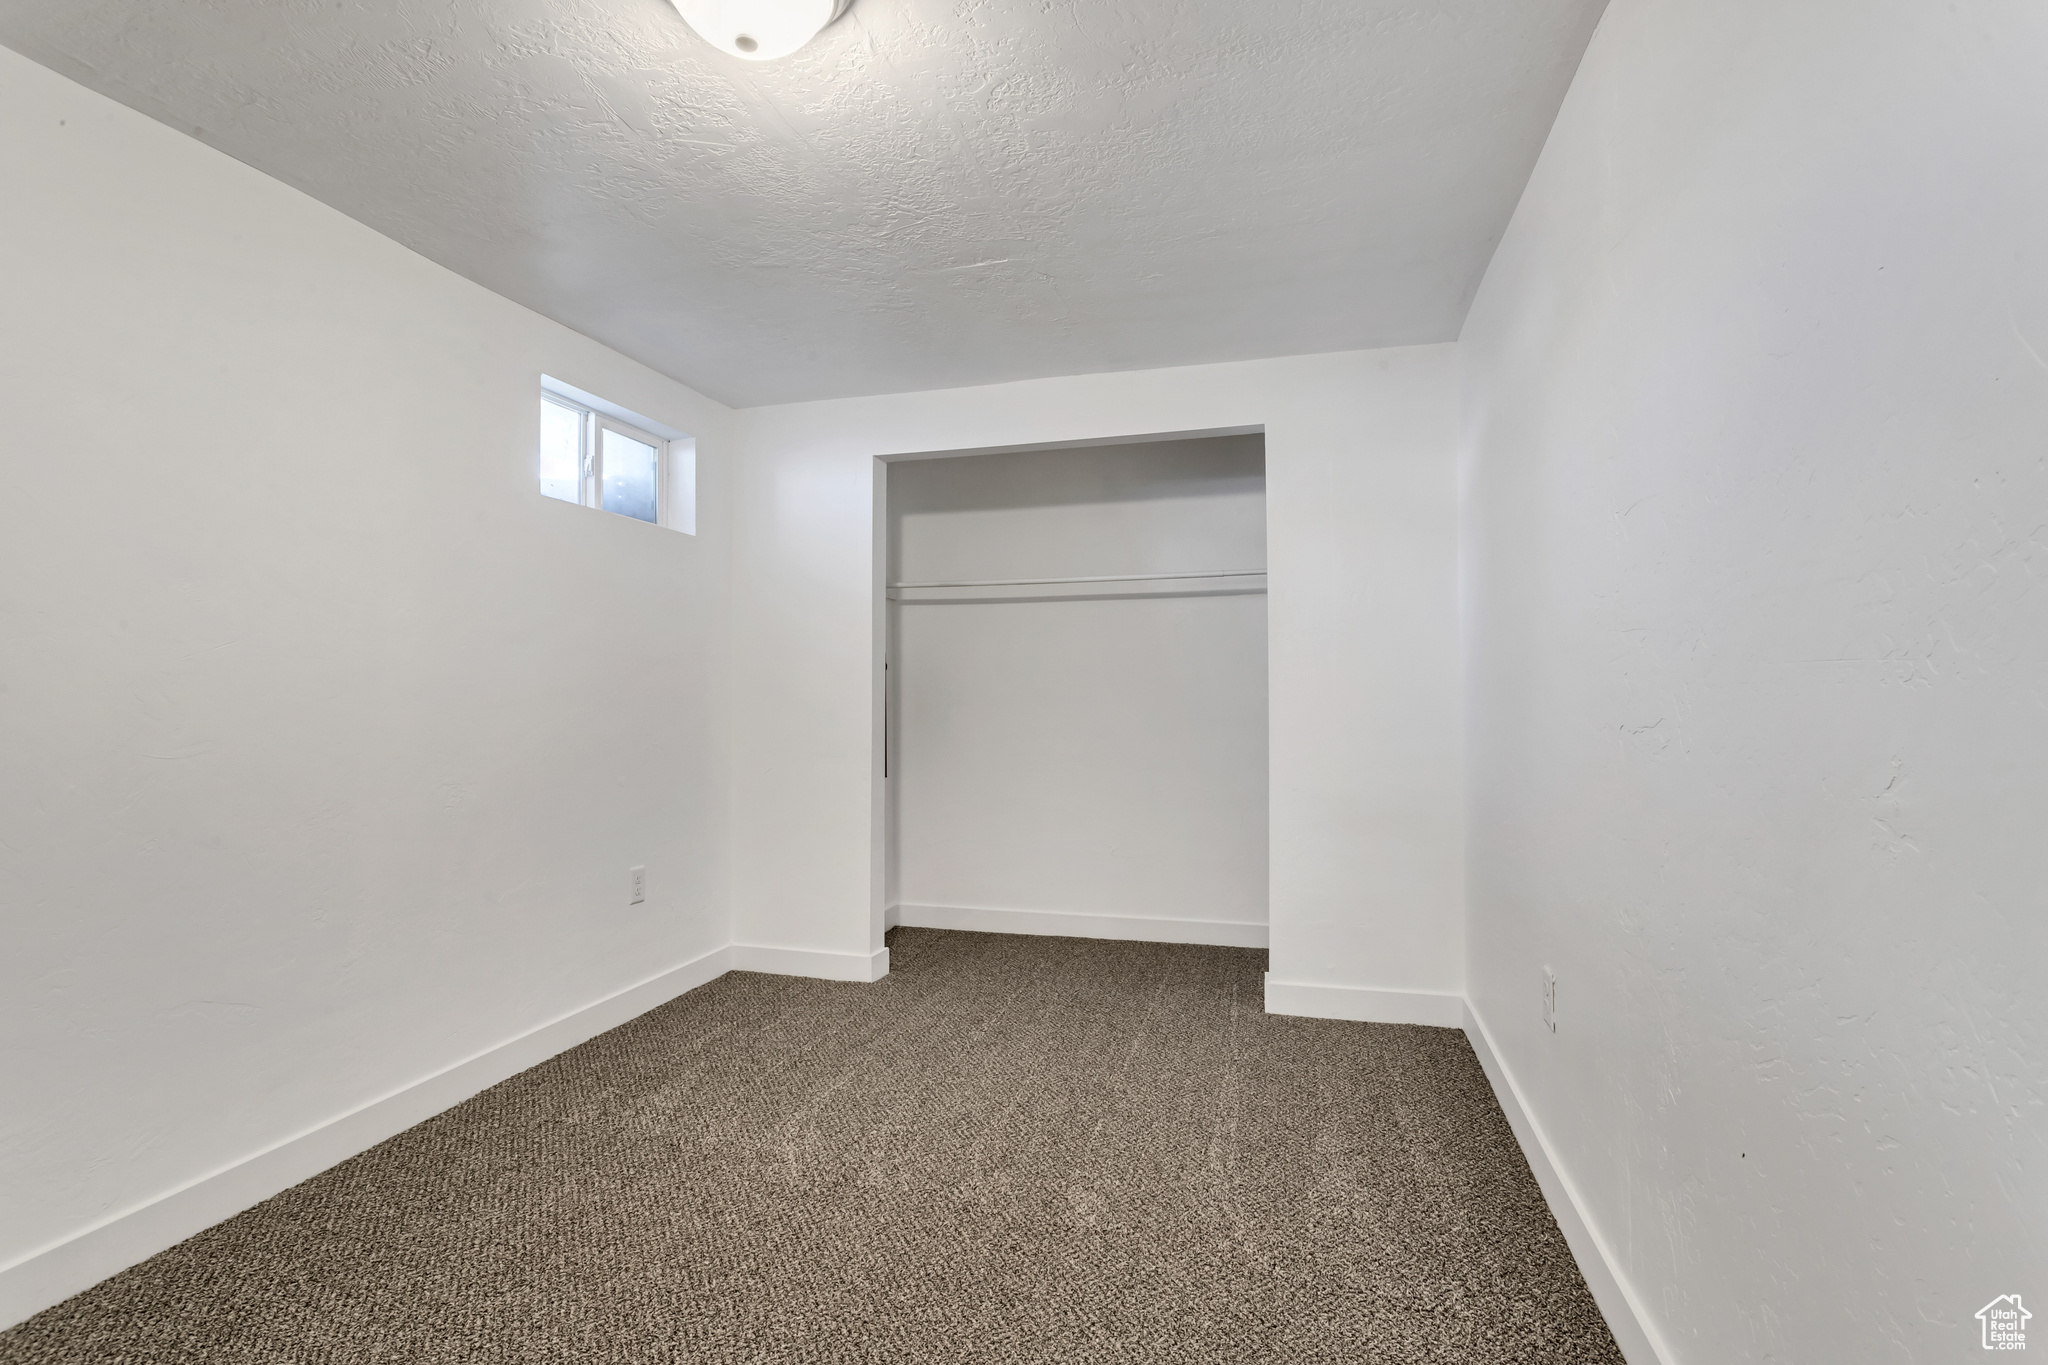 Unfurnished bedroom with dark colored carpet, a closet, and a textured ceiling